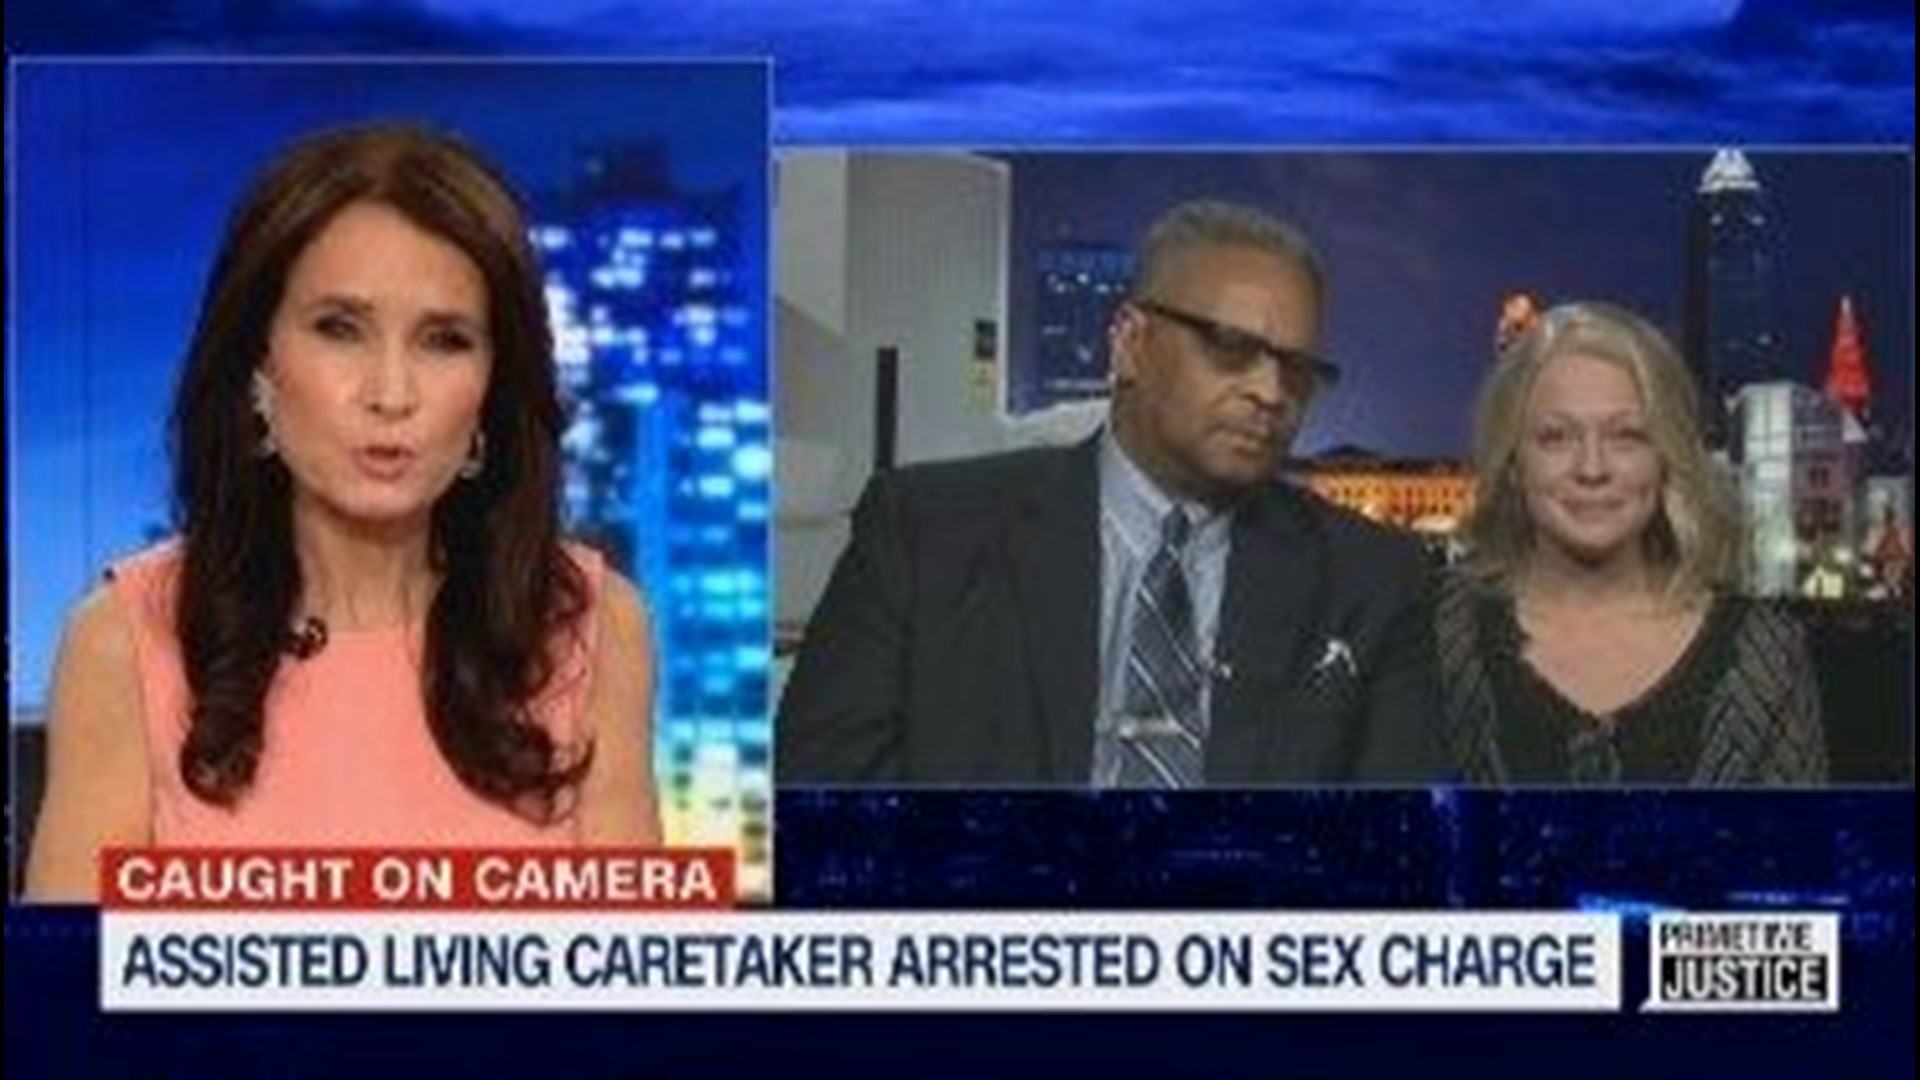 PART 2: Interview with assisted living caretaker arrested on sex charge